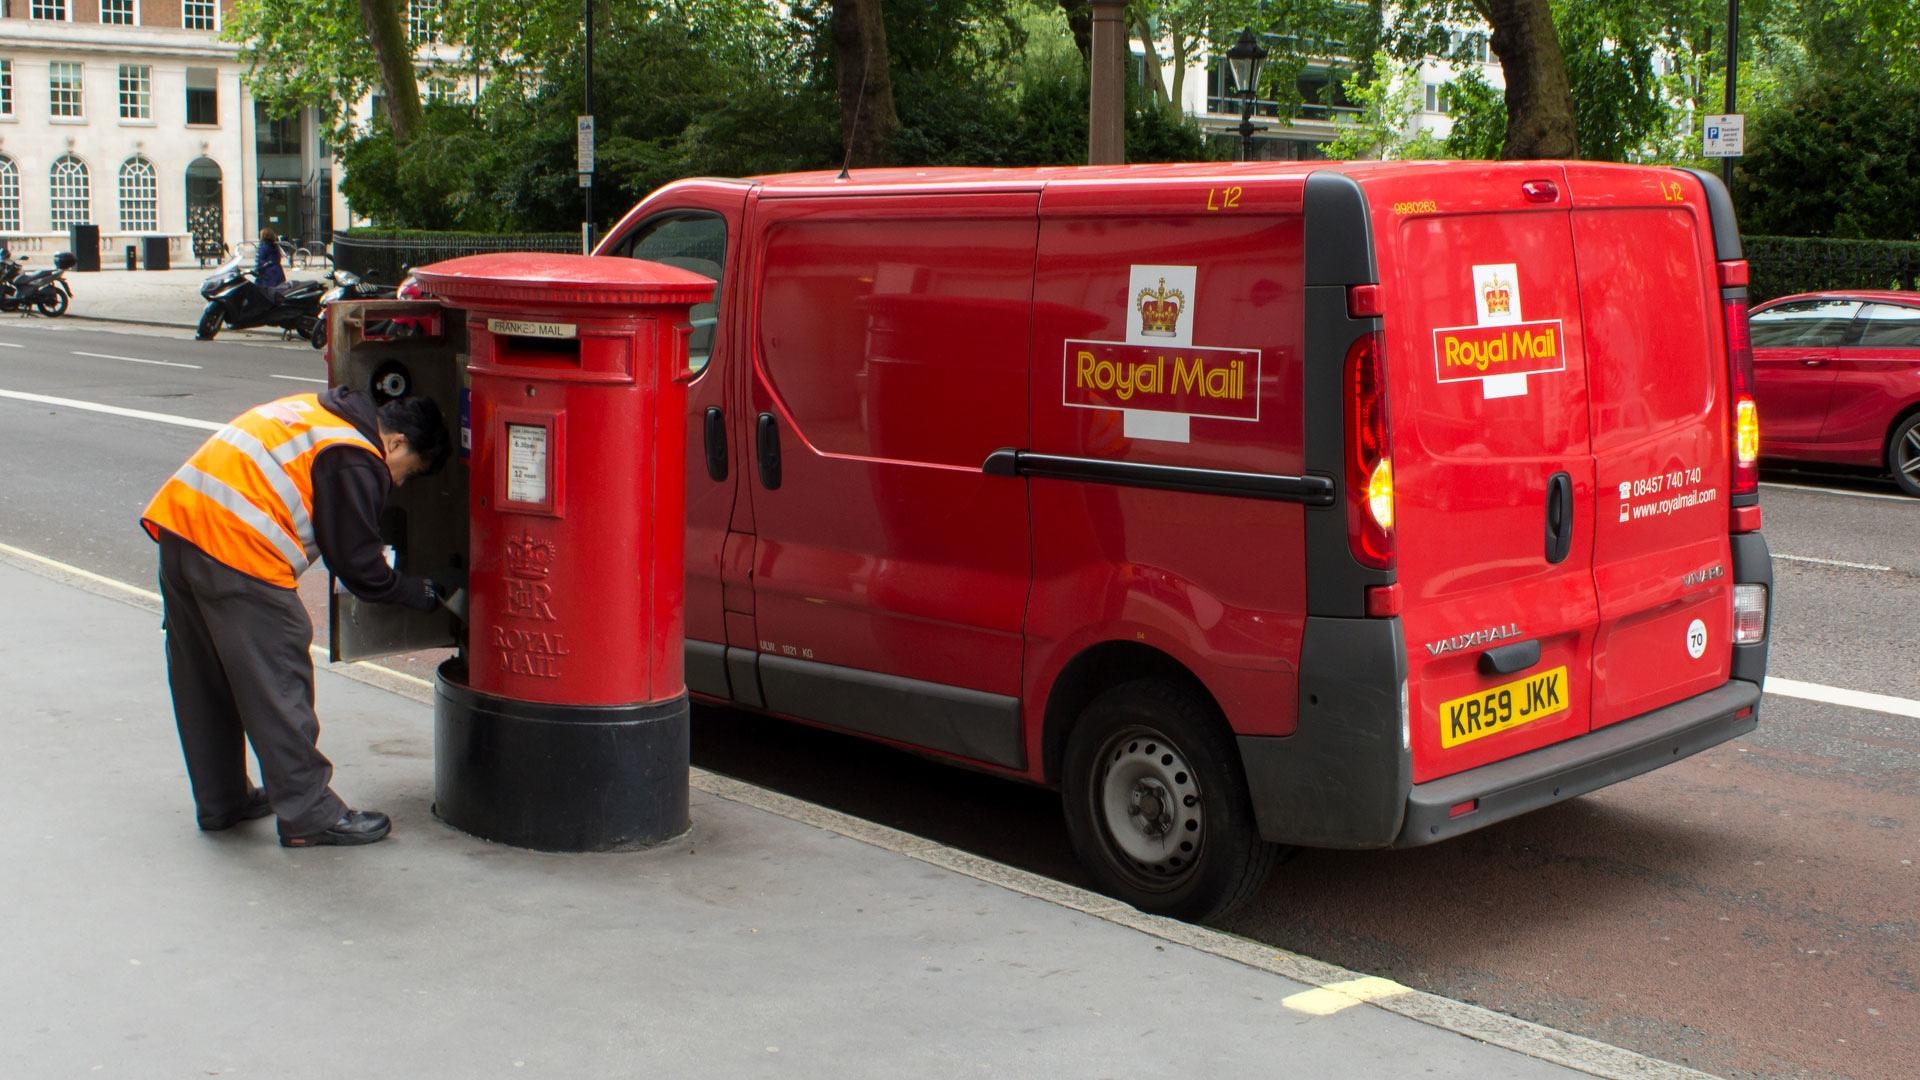 Royal Mail Proposes Overhaul of Postal Services: Maintaining First-Class Deliveries and Reducing Frequency for Second-Class Services